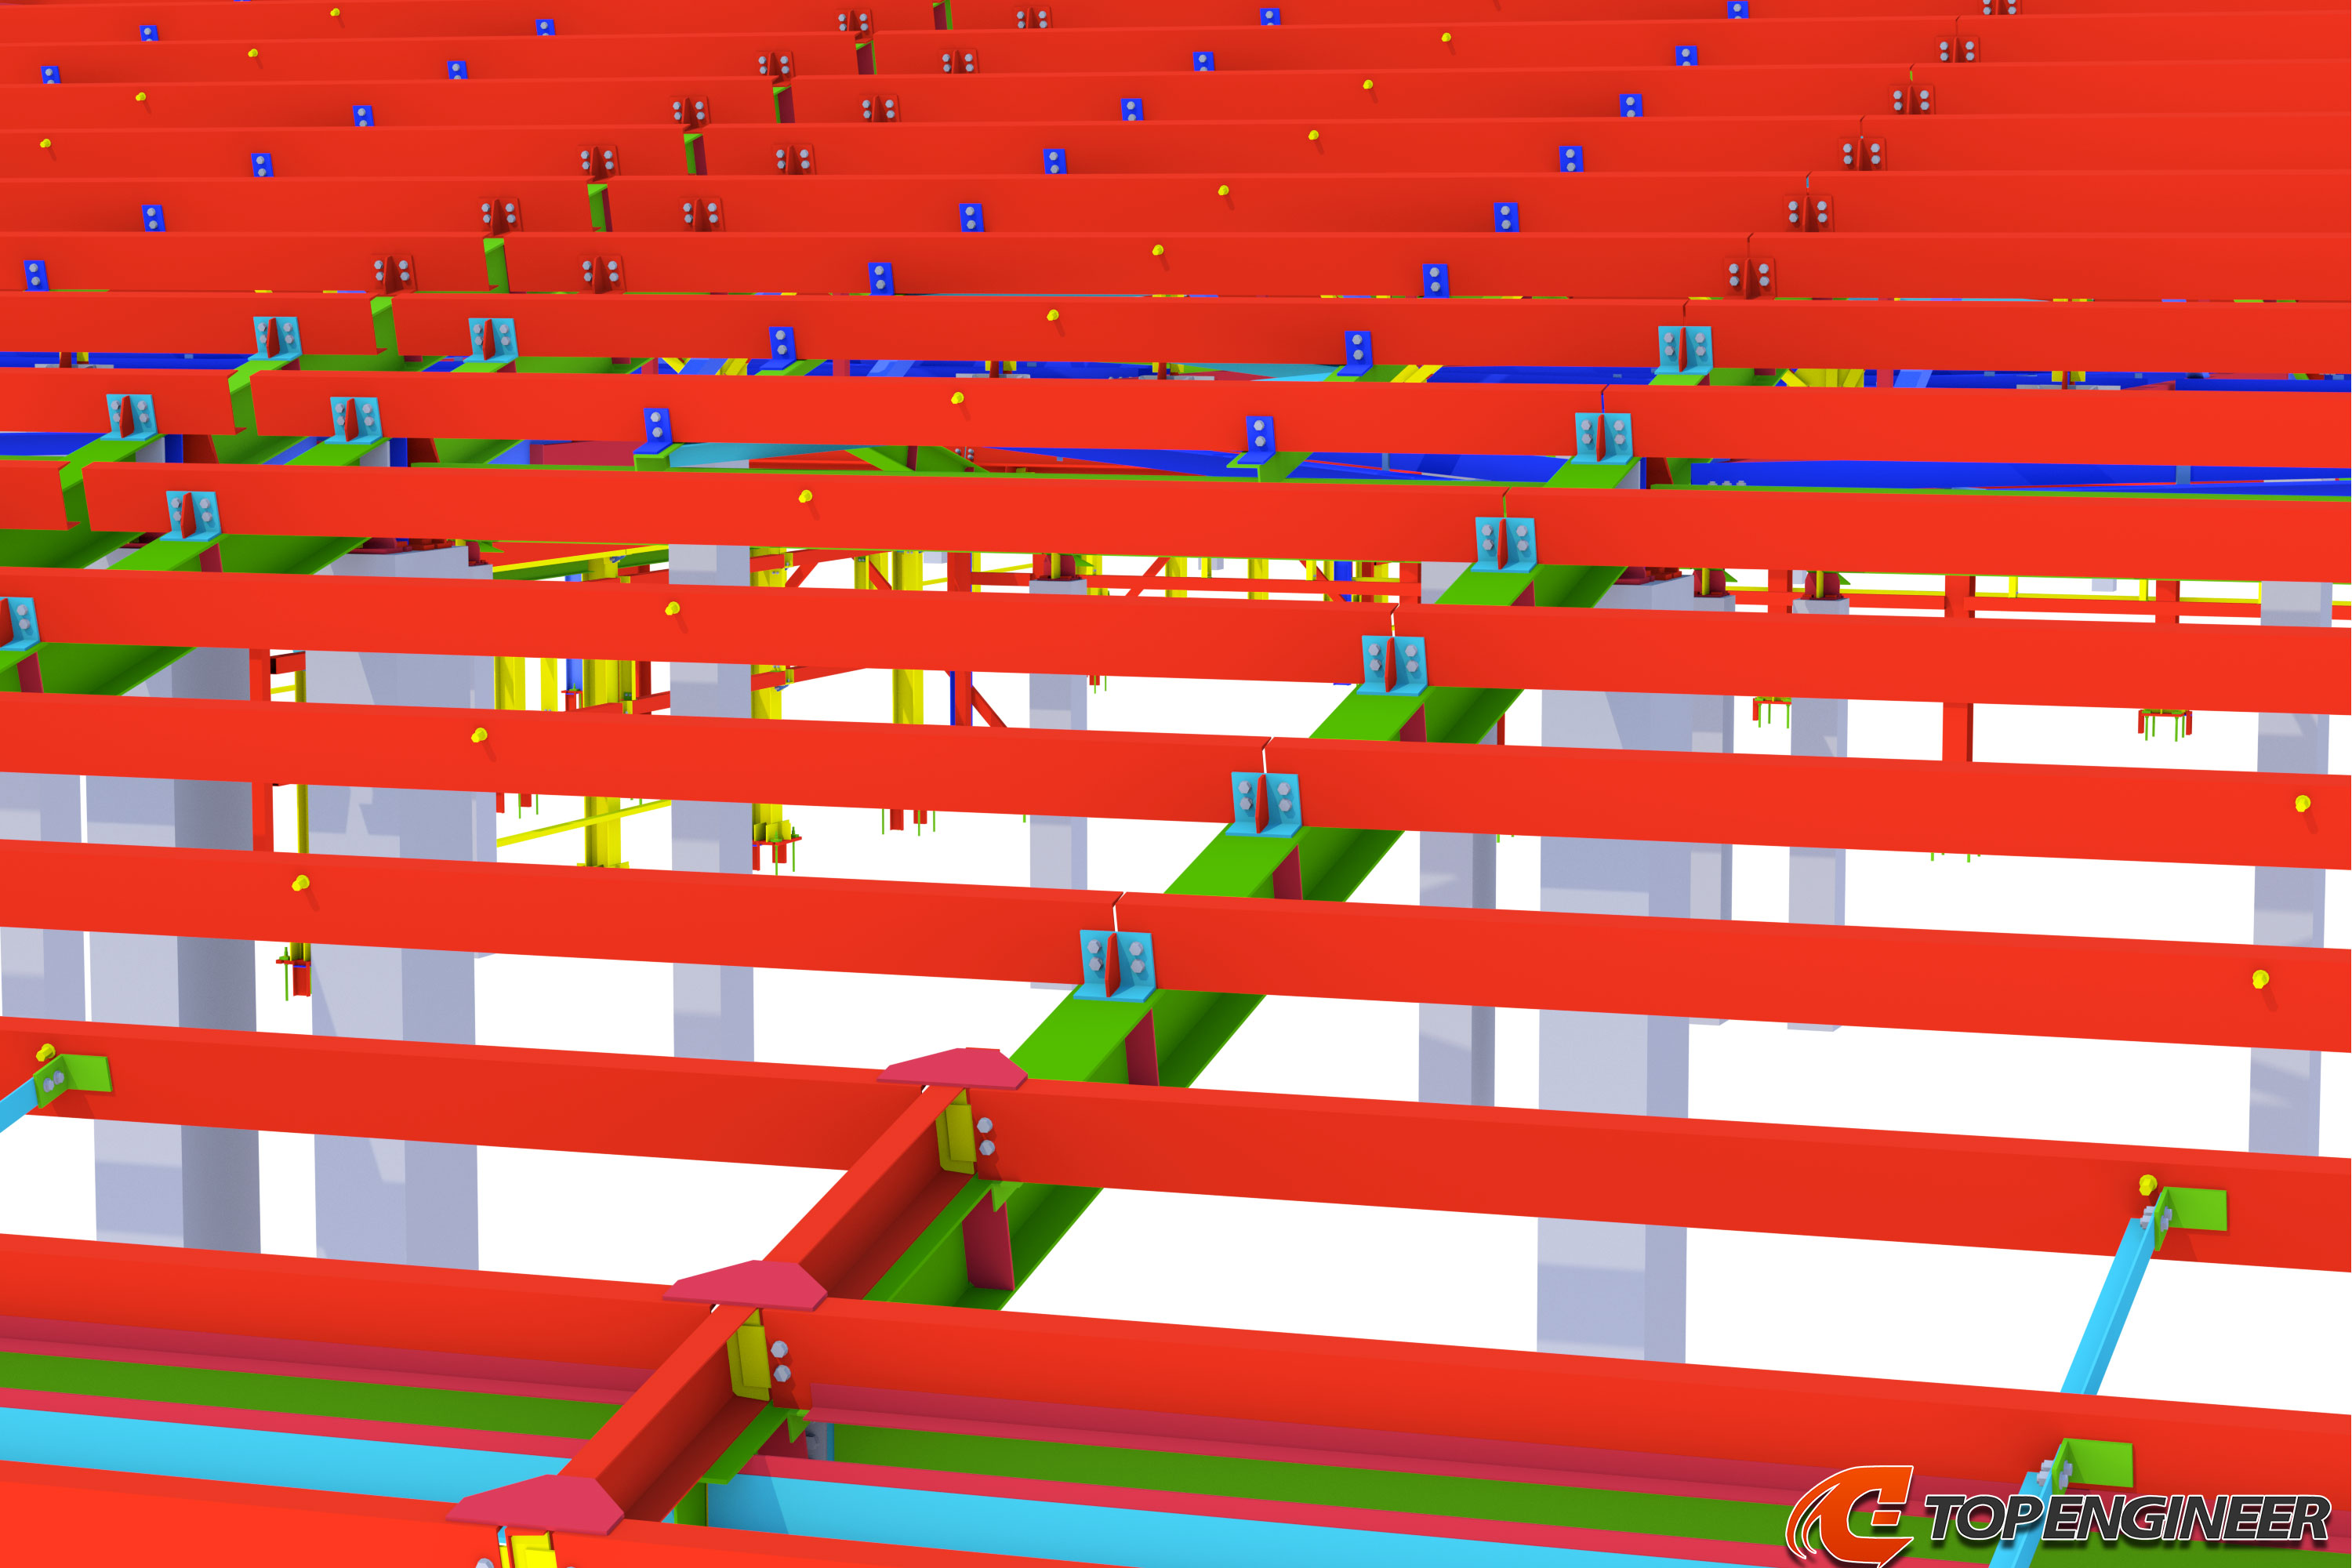 Structural drawings for warehouse in Tekla Structures